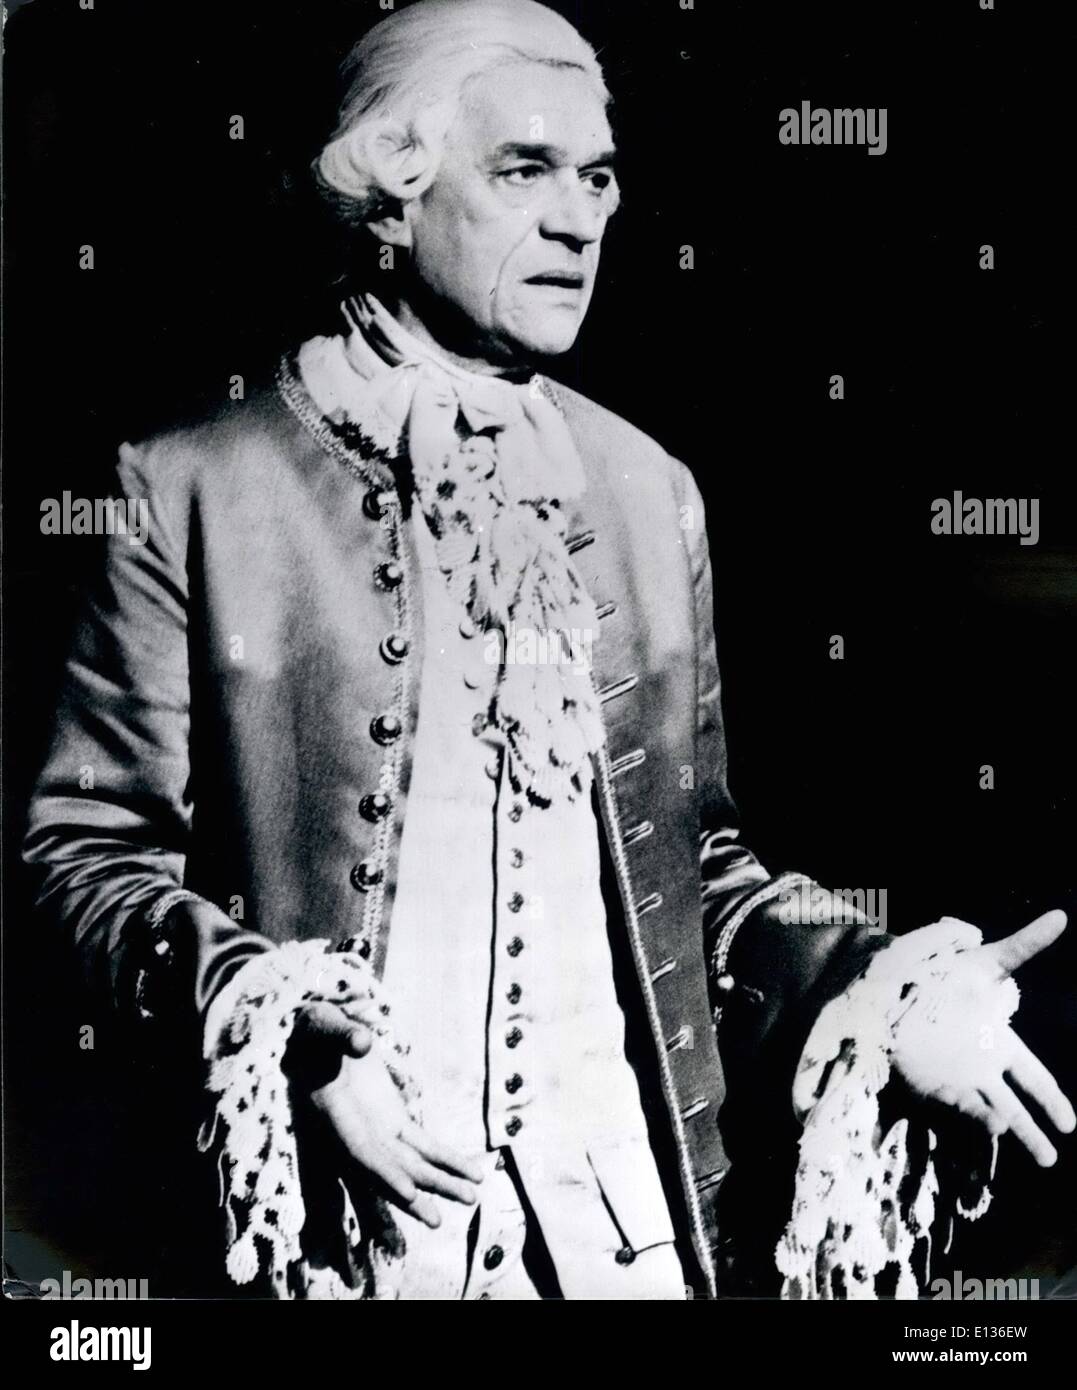 Feb. 28, 2012 - January 1980 Paul Scofield in Amadeus at the Olivier Theatre. The National Theatre production of Peter Shaffer's new play Amadeus at the Olivier Theatre, South Bank, London. Directed by Peter Hall with design and lighting by John Bury, music by Mozart and Salieri. Photo Shows: Paul Scofield who takes the part of Antonio Salieri in the play. Stock Photo